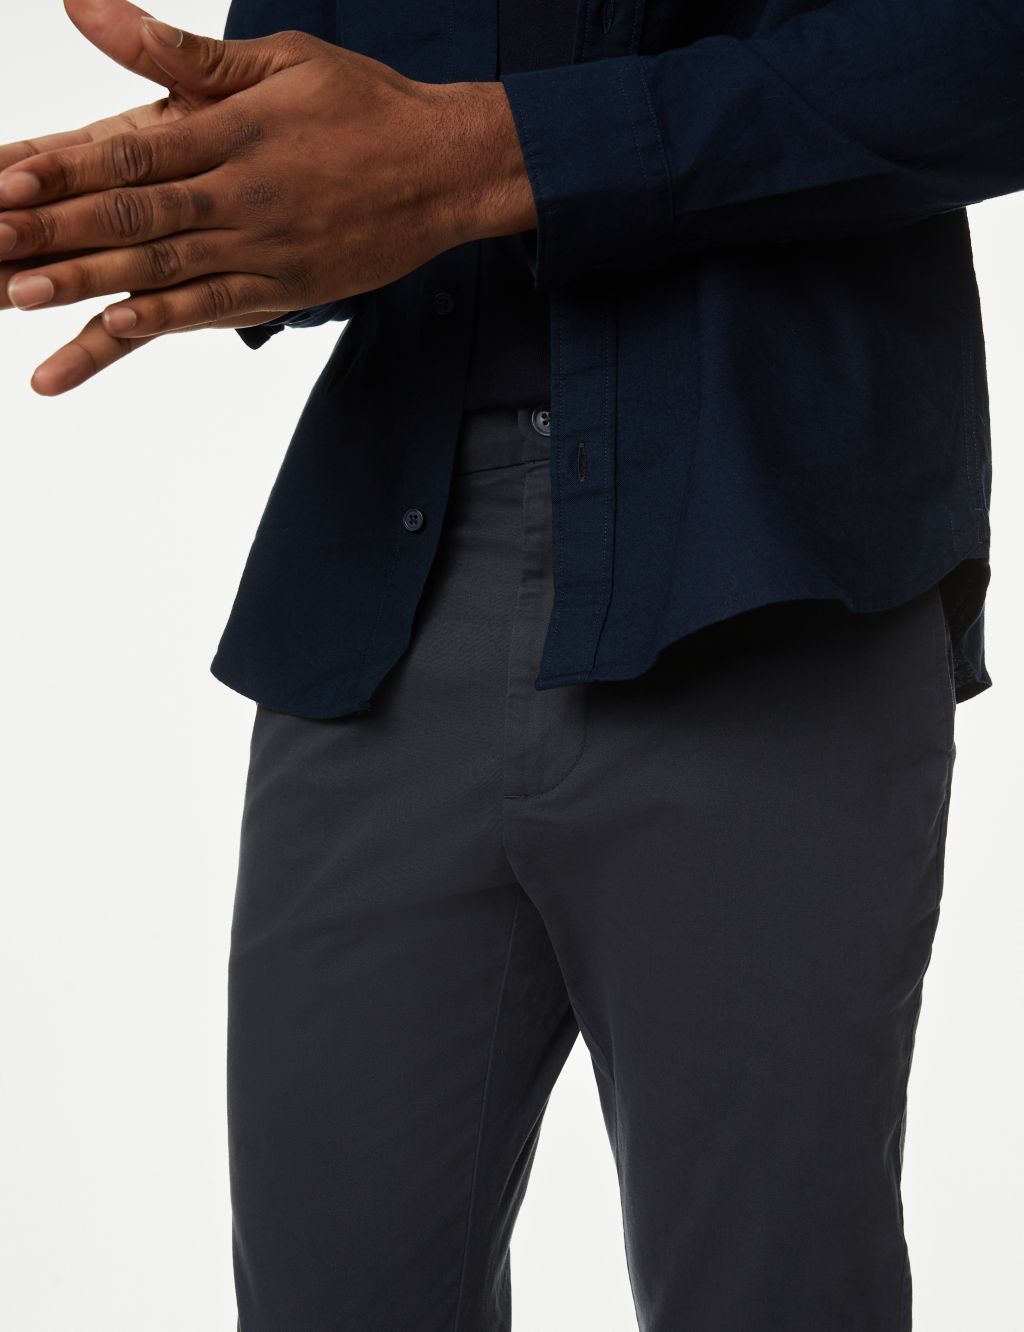 Skinny Fit Stretch Chinos image 3